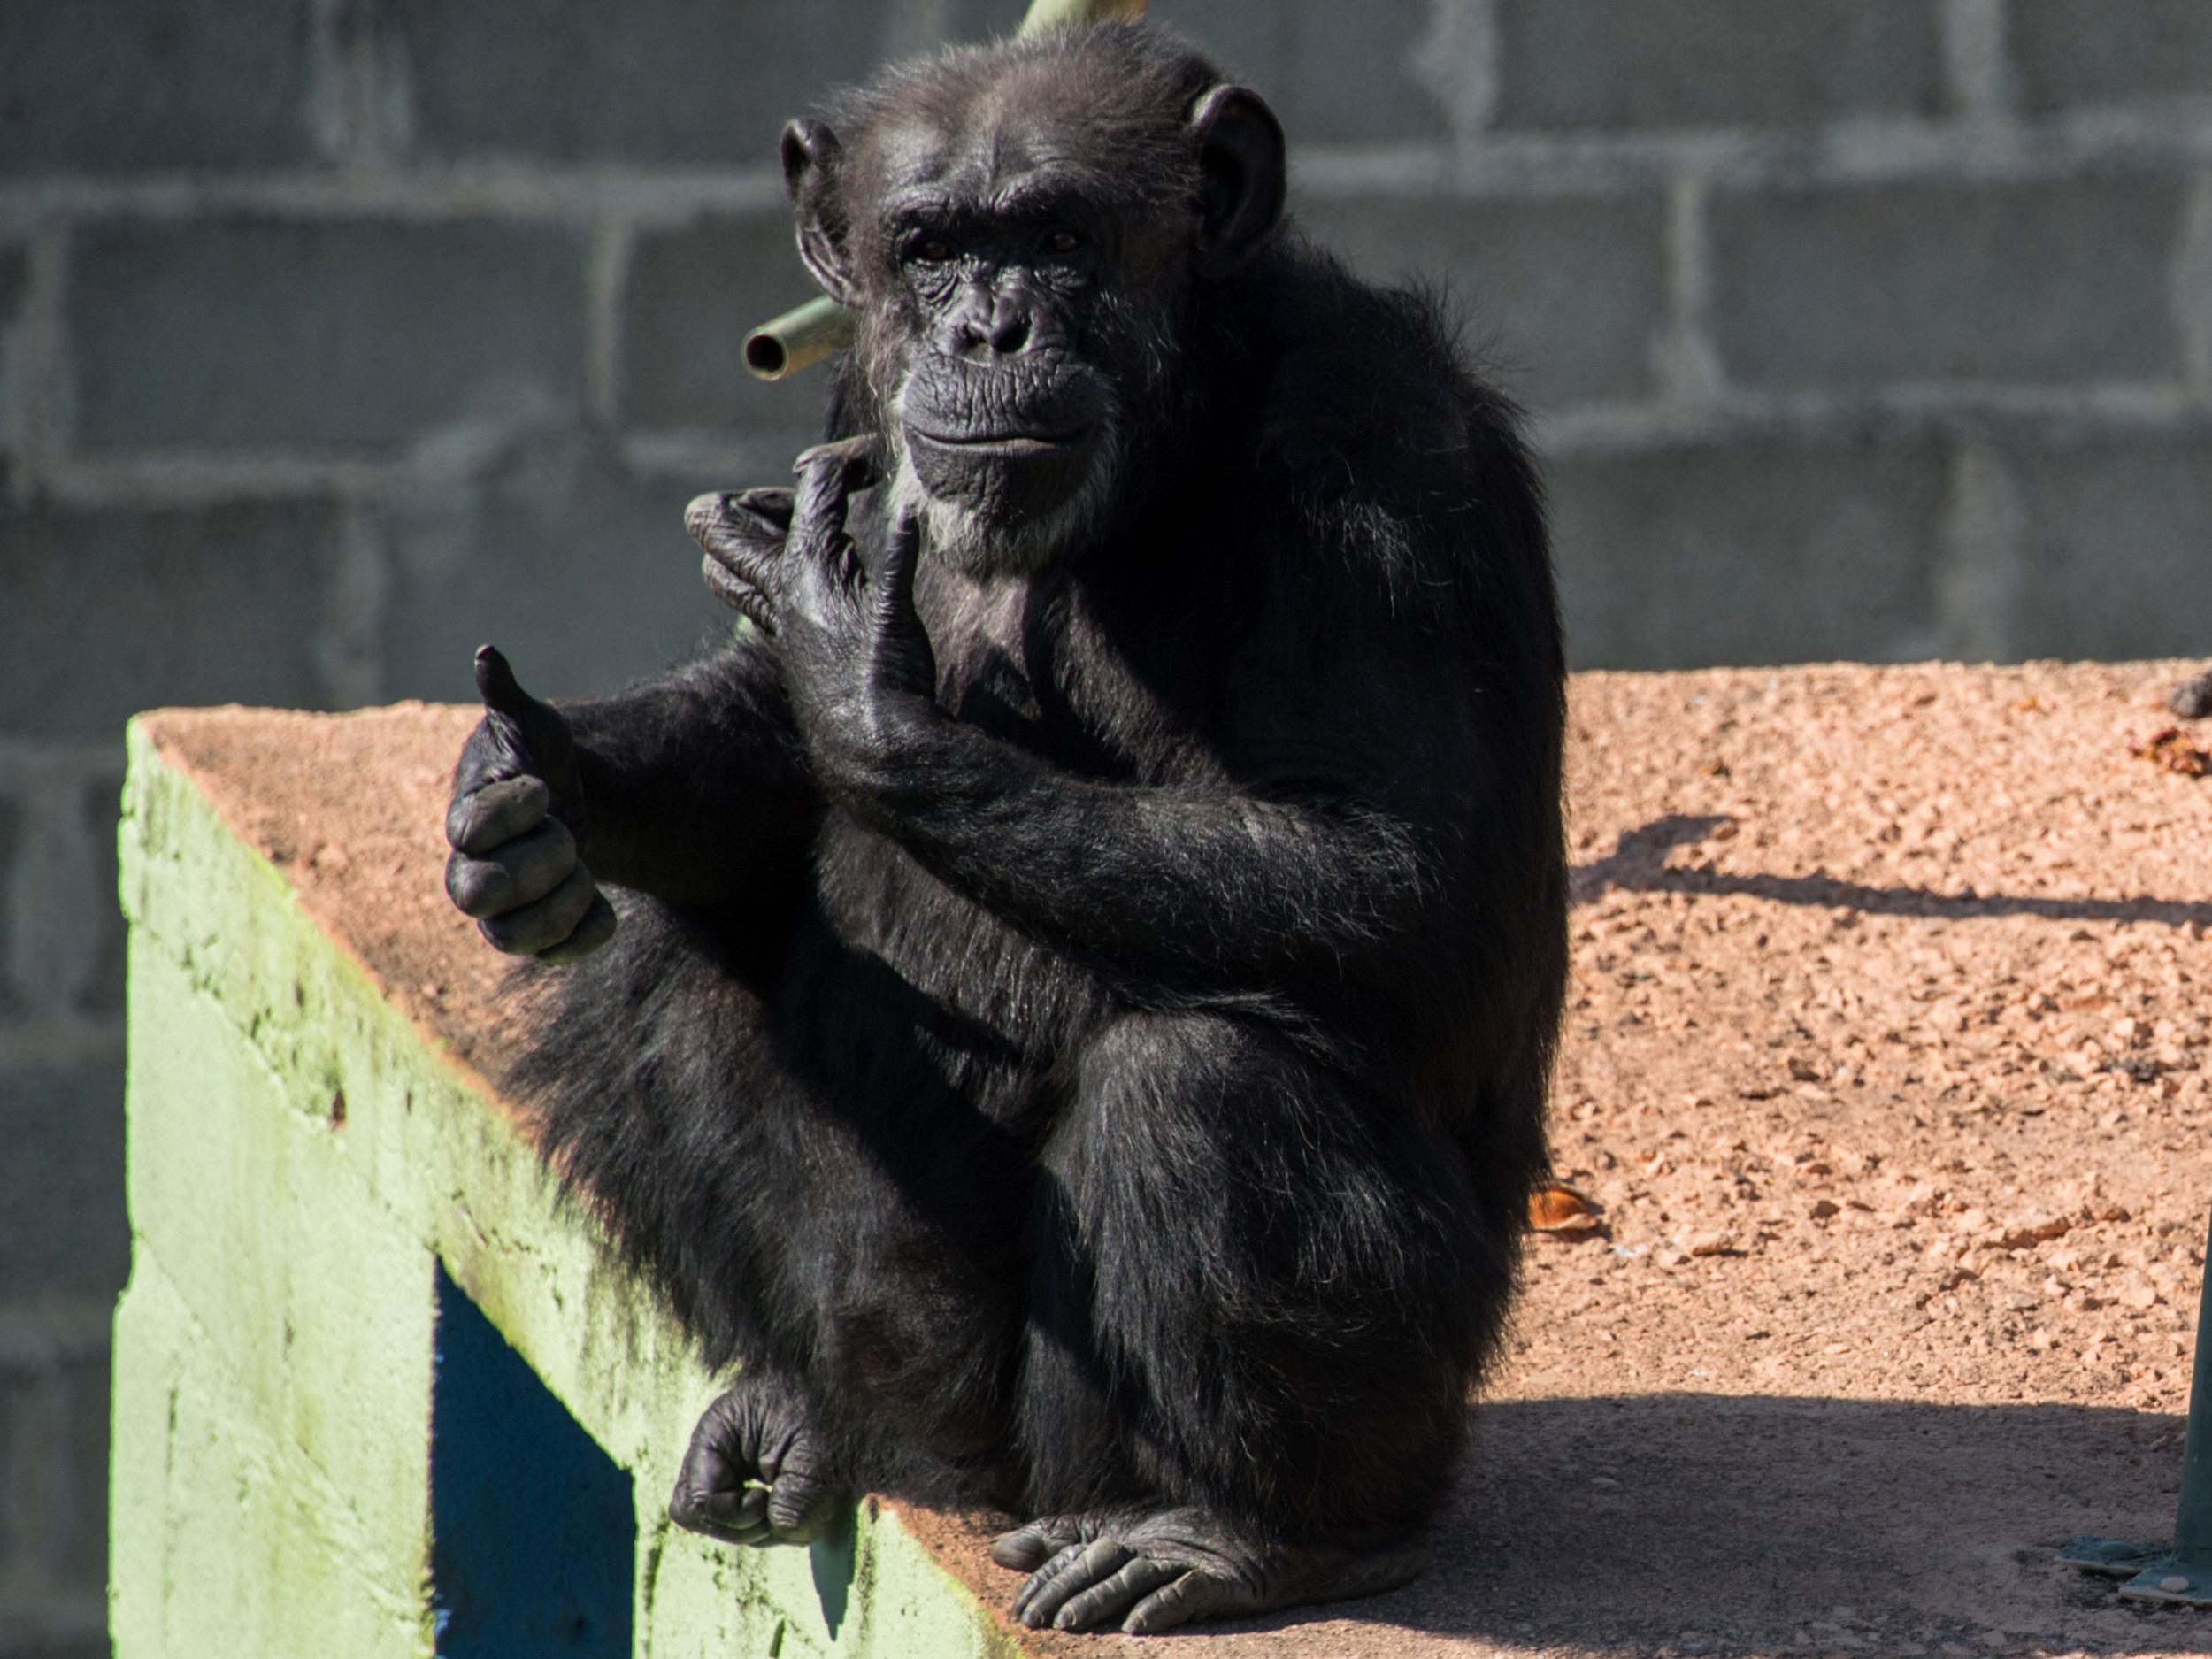 Along with dolphins and some elephants, chimps can pass the ‘mirror test’, indicating self-awareness